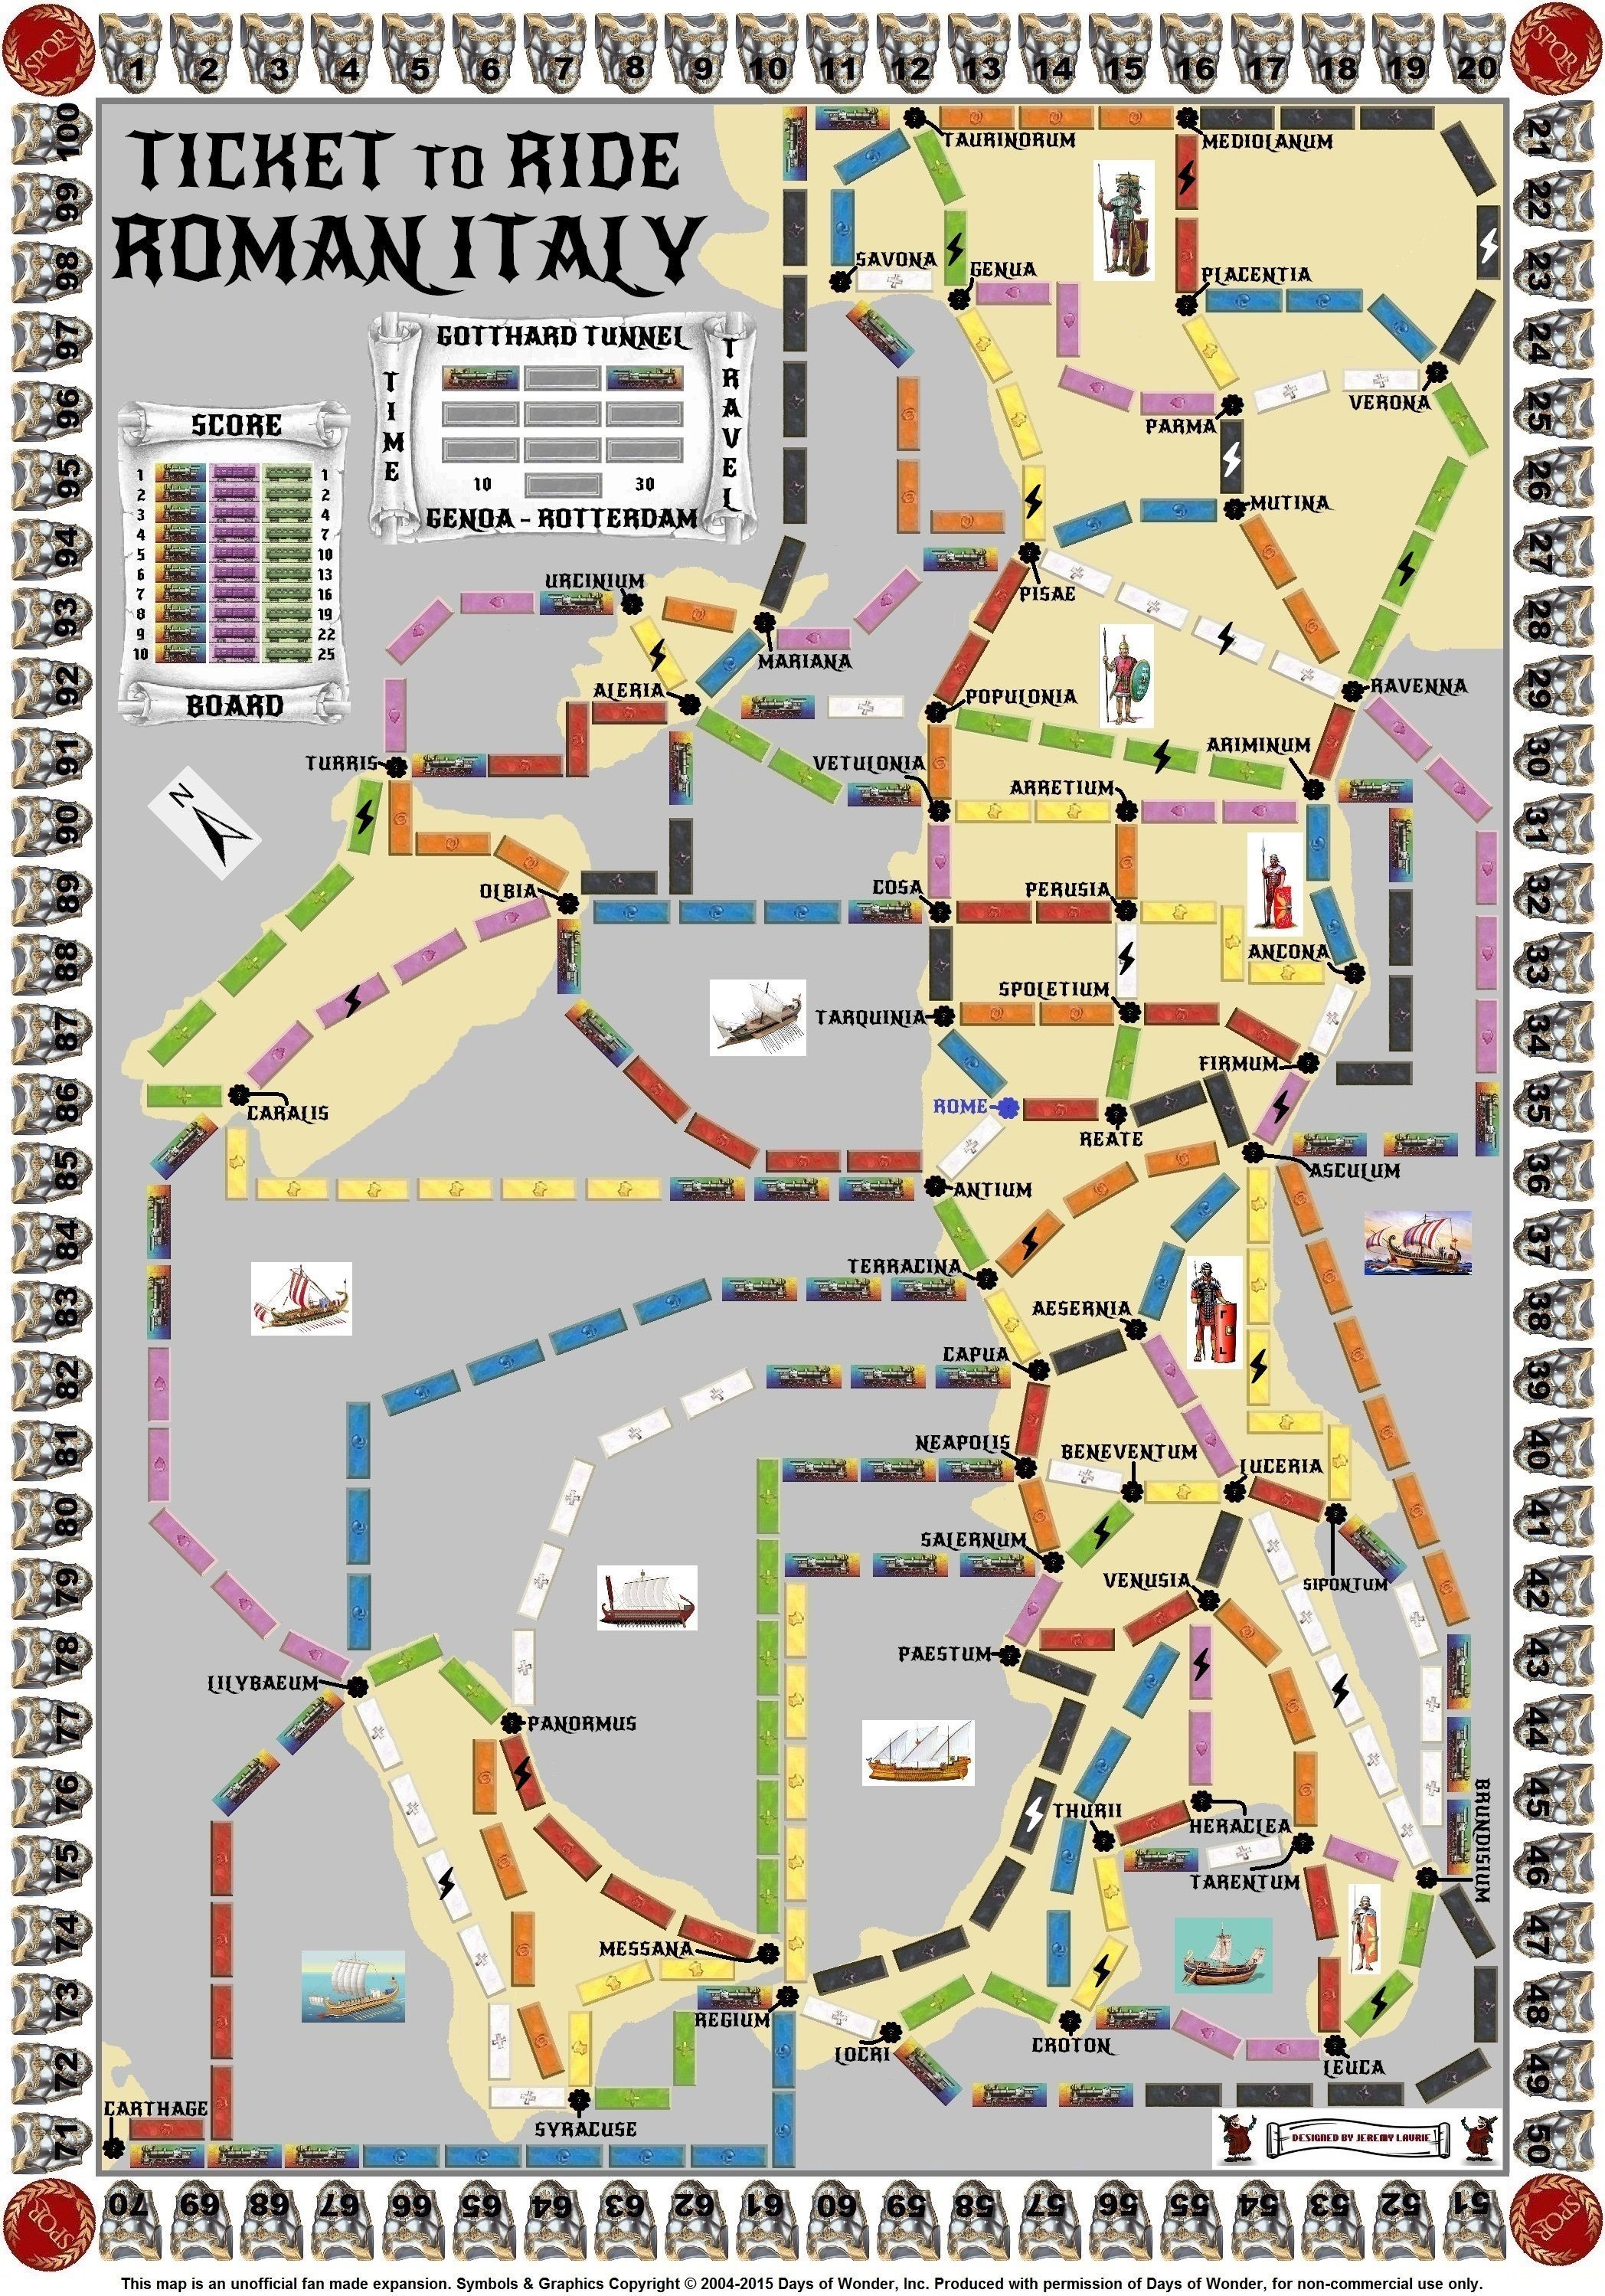 Roman Italy (fan expansion for Ticket to Ride)